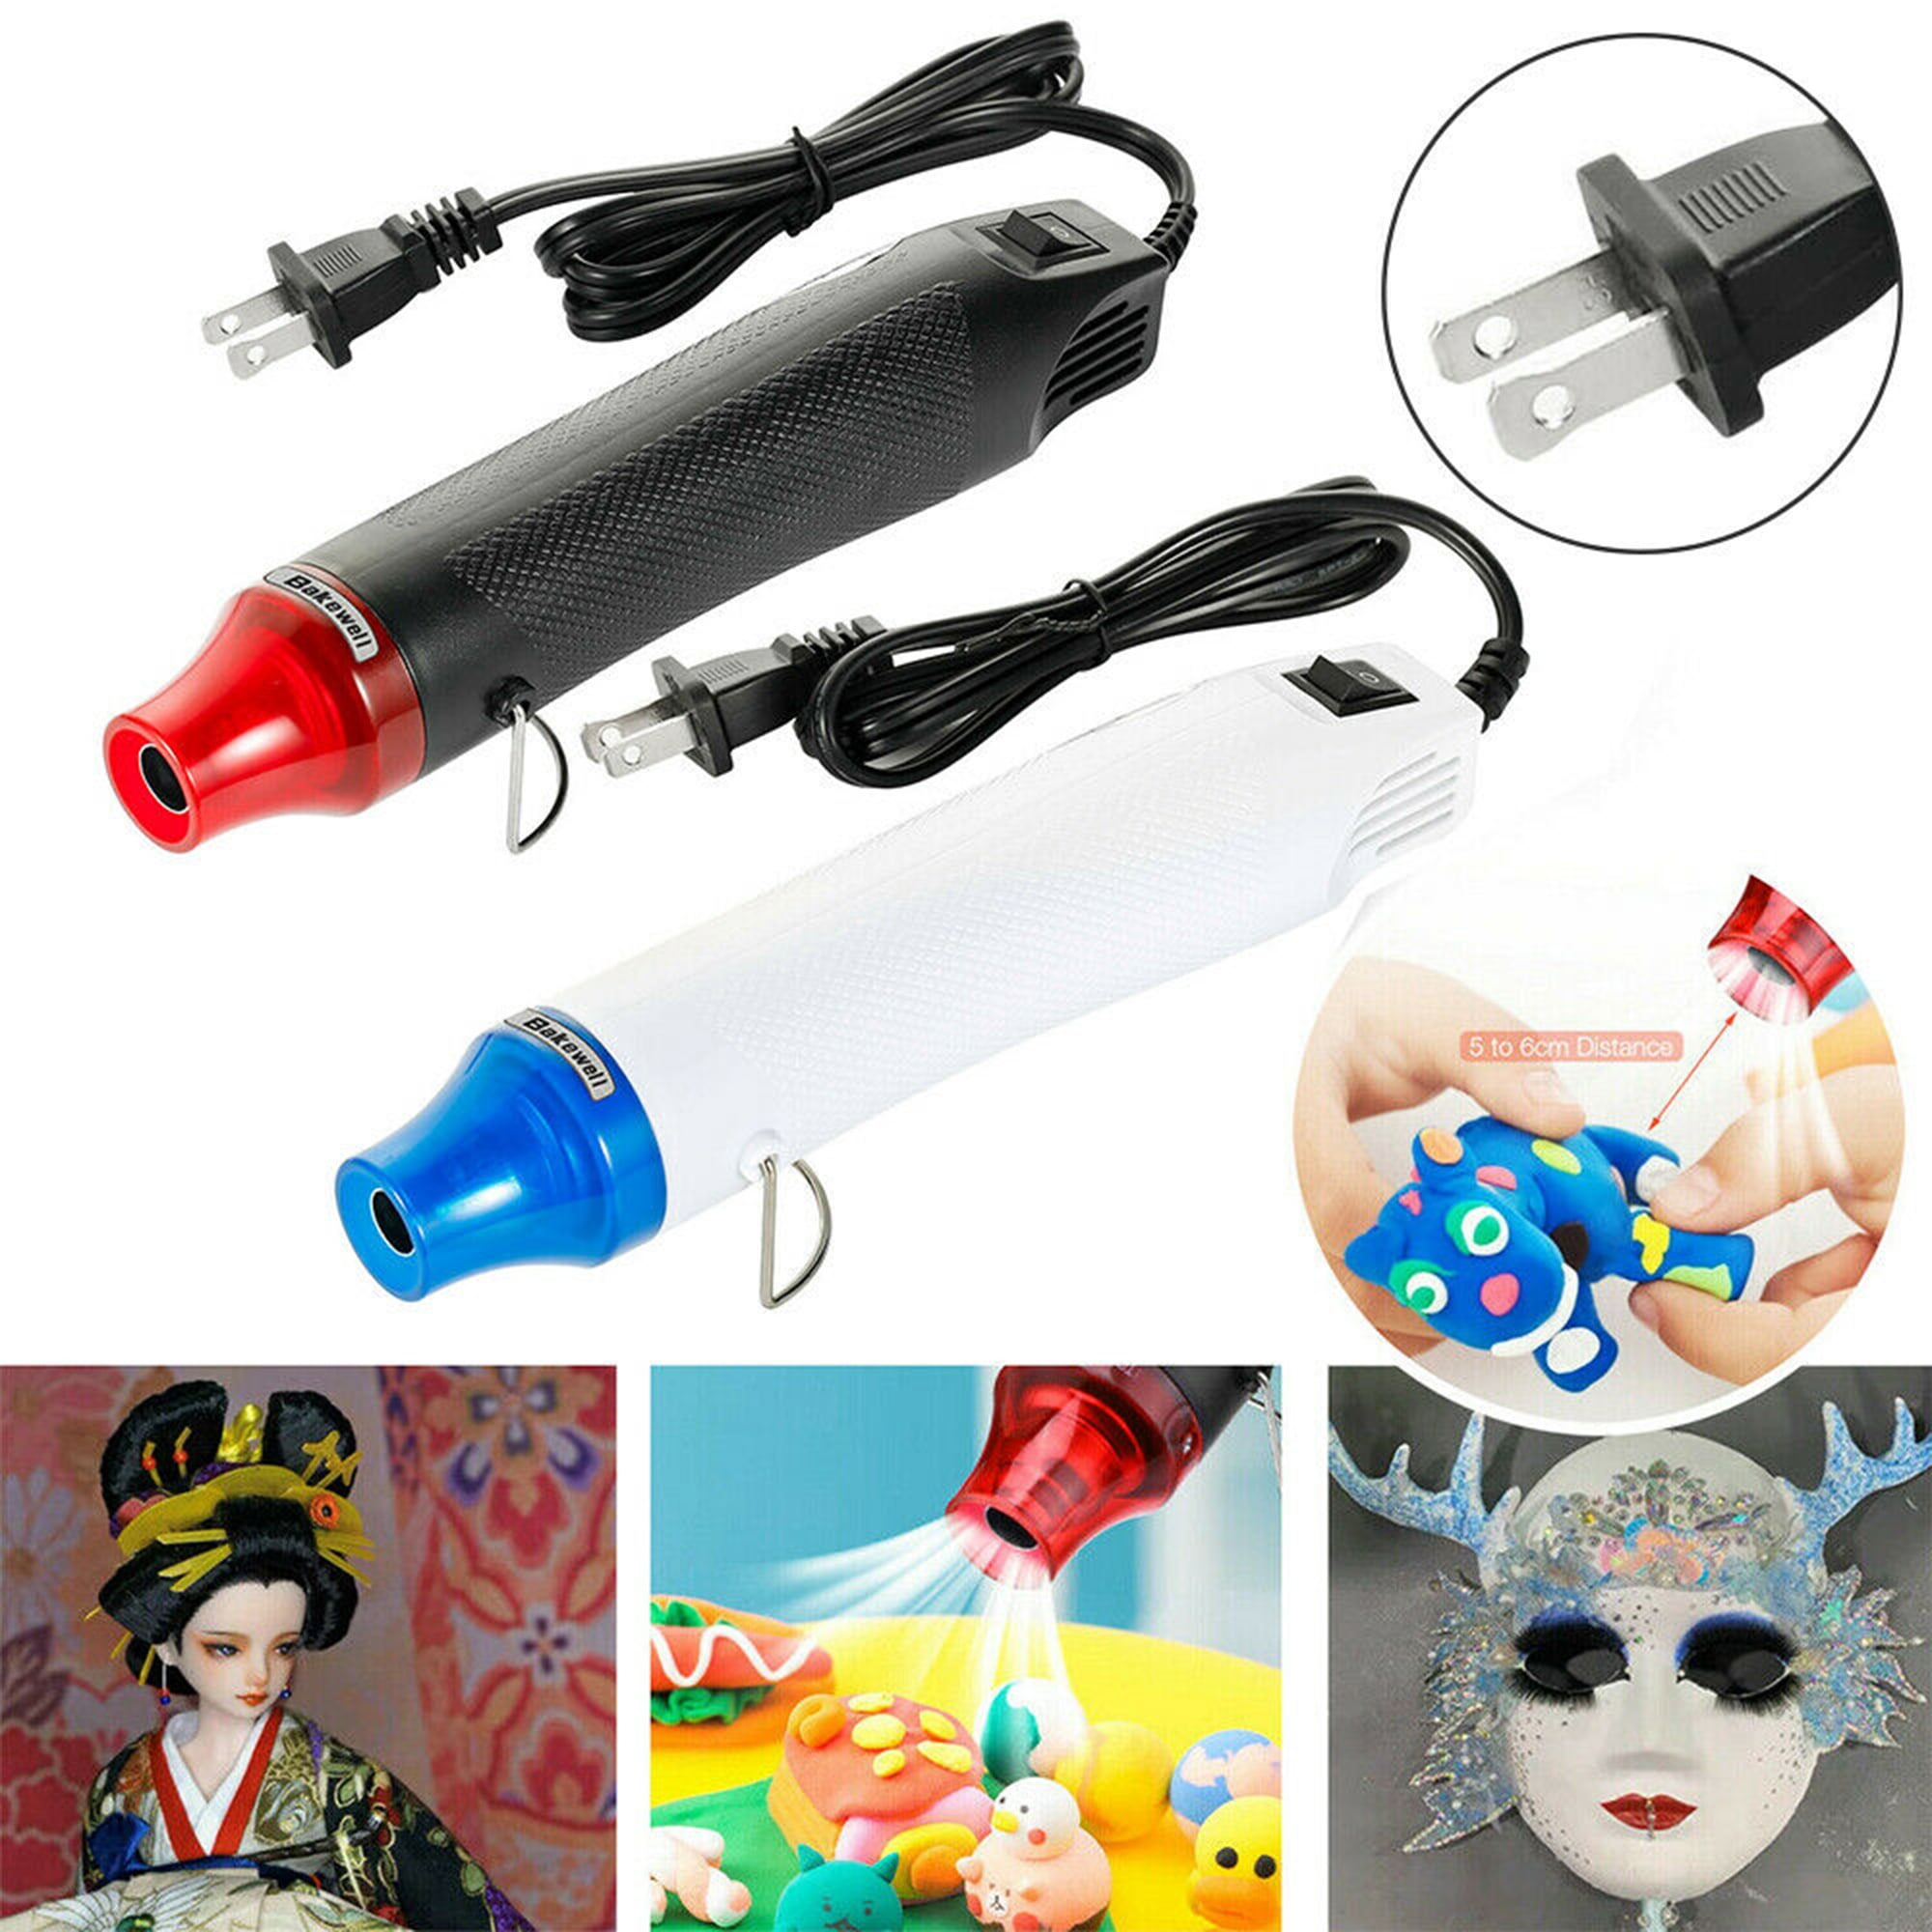 Heat Gun for Crafts, Mini Dual Temp Hot Air Gun Tool for Epoxy Resin,  Shrink Wrapping, Vinyl Wrap, Embossing, Electronics, Candle Making,  Sublimation